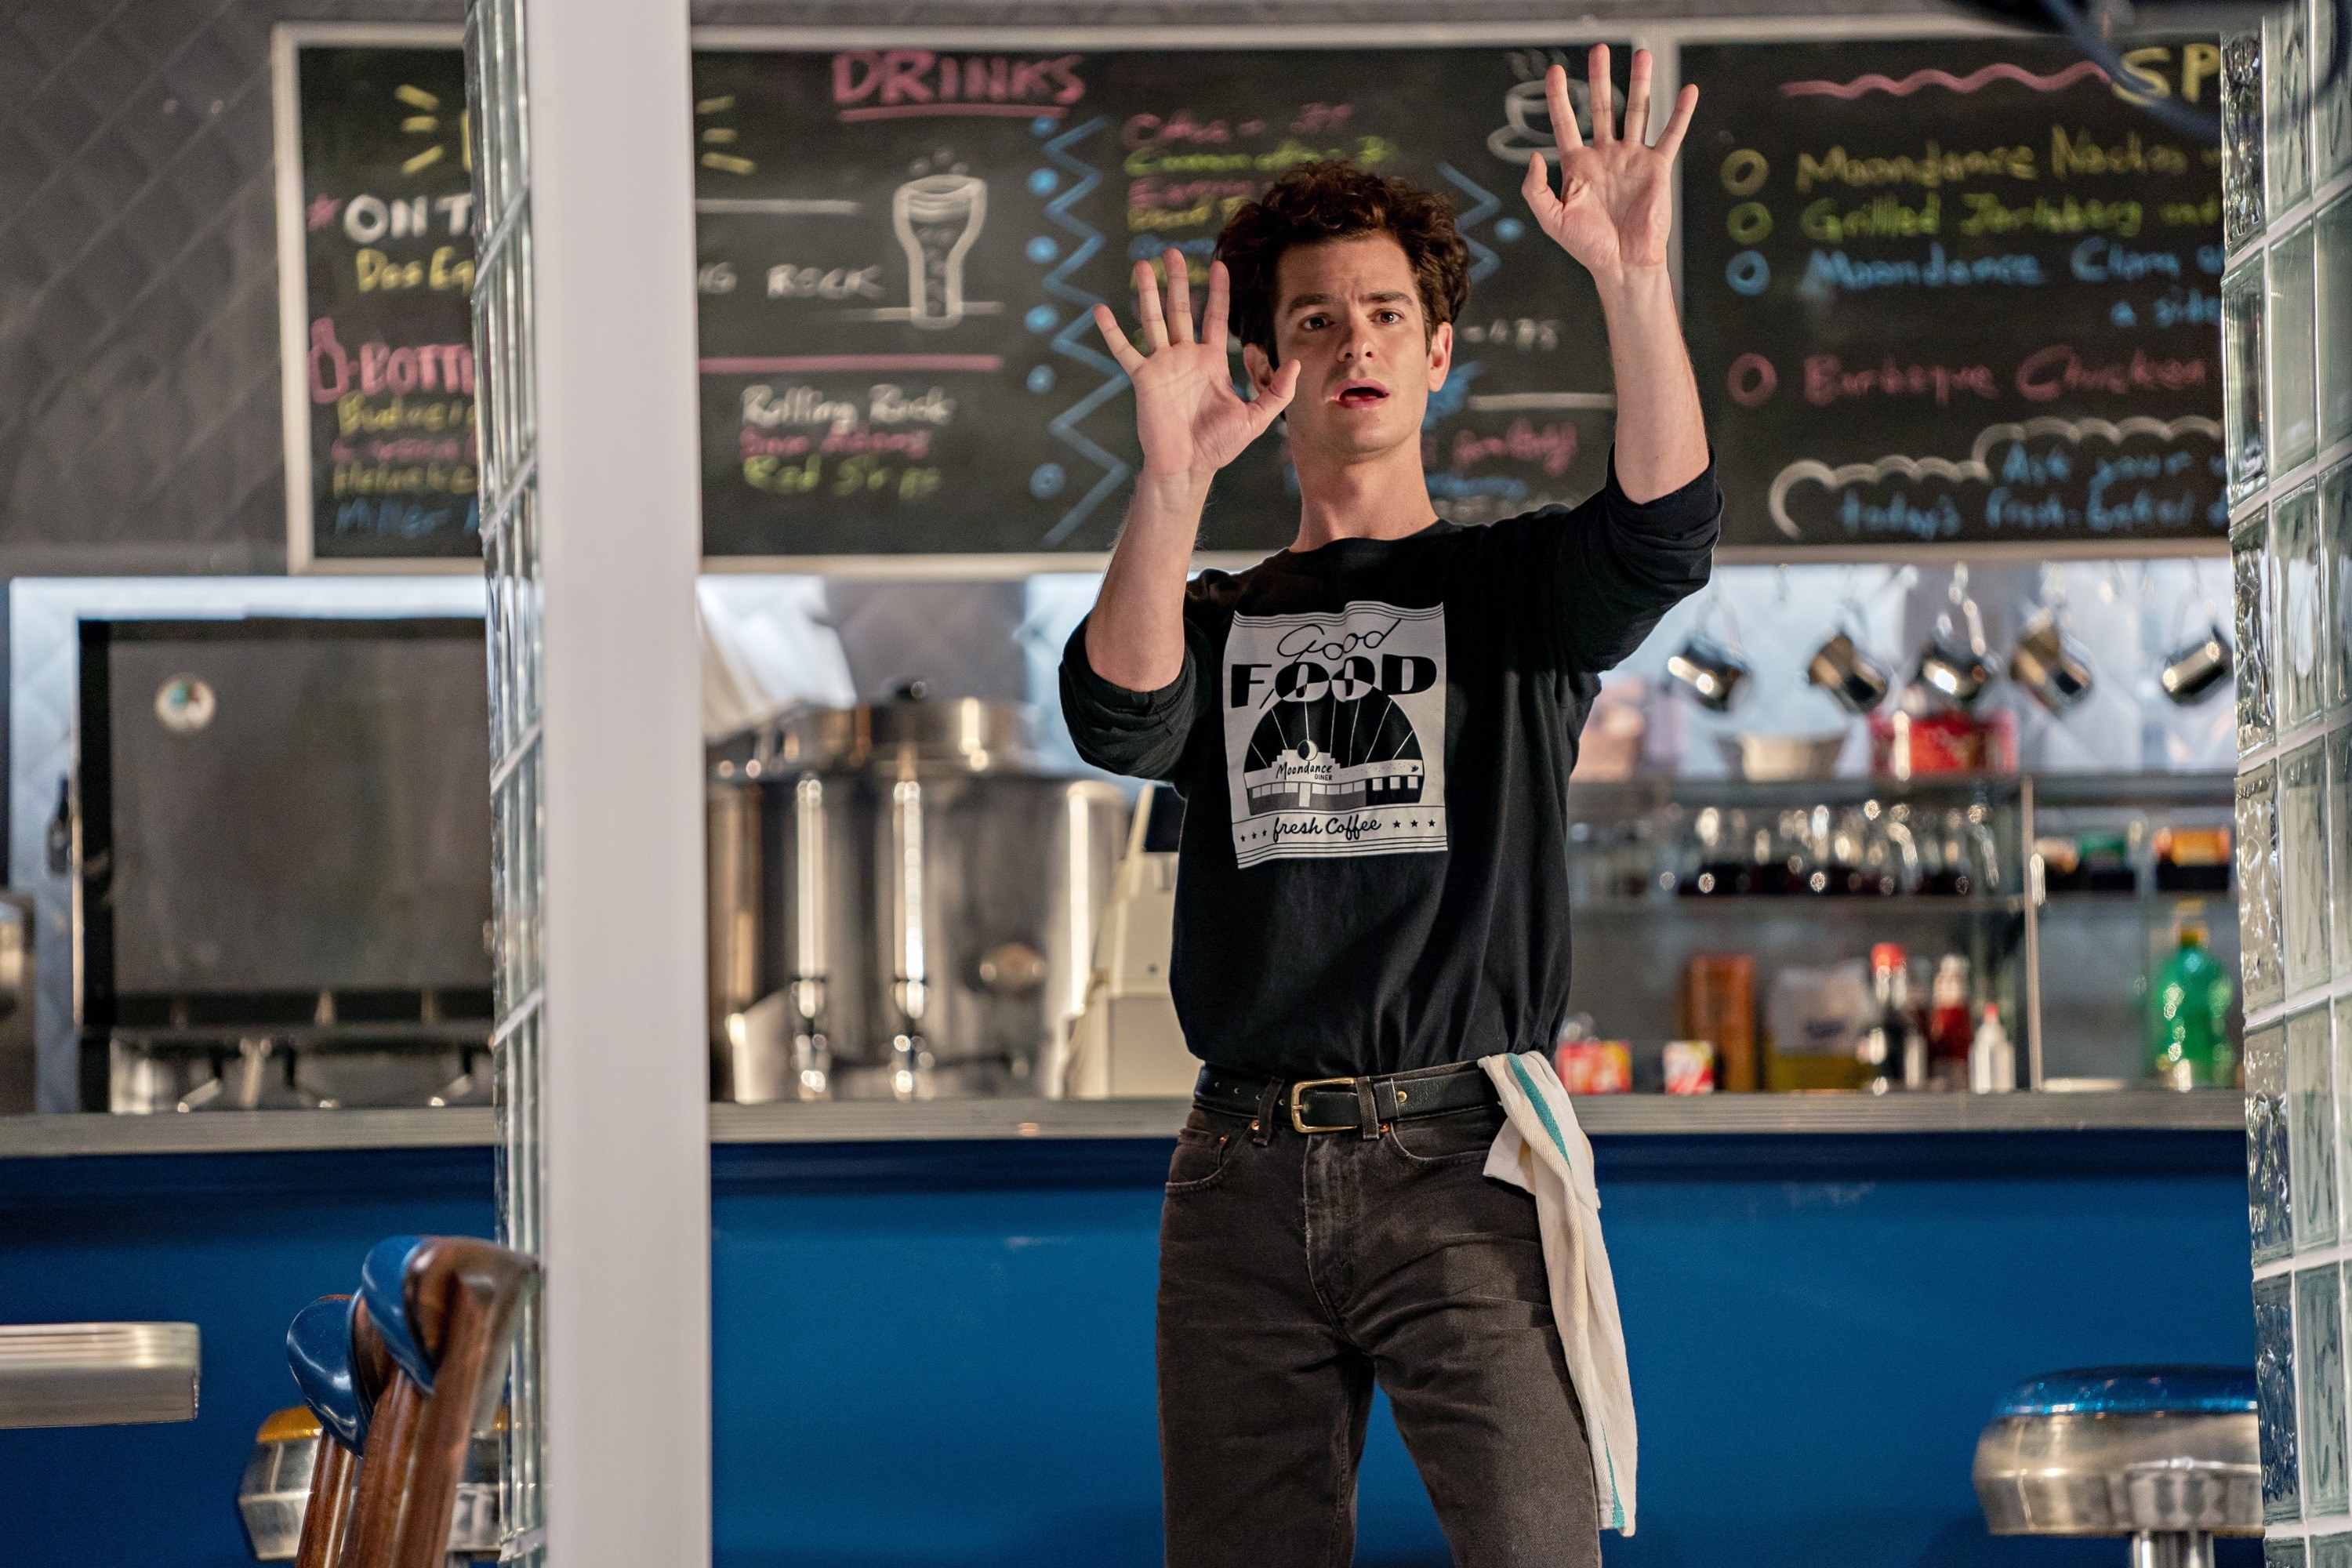 Andrew Garfield stands in a diner